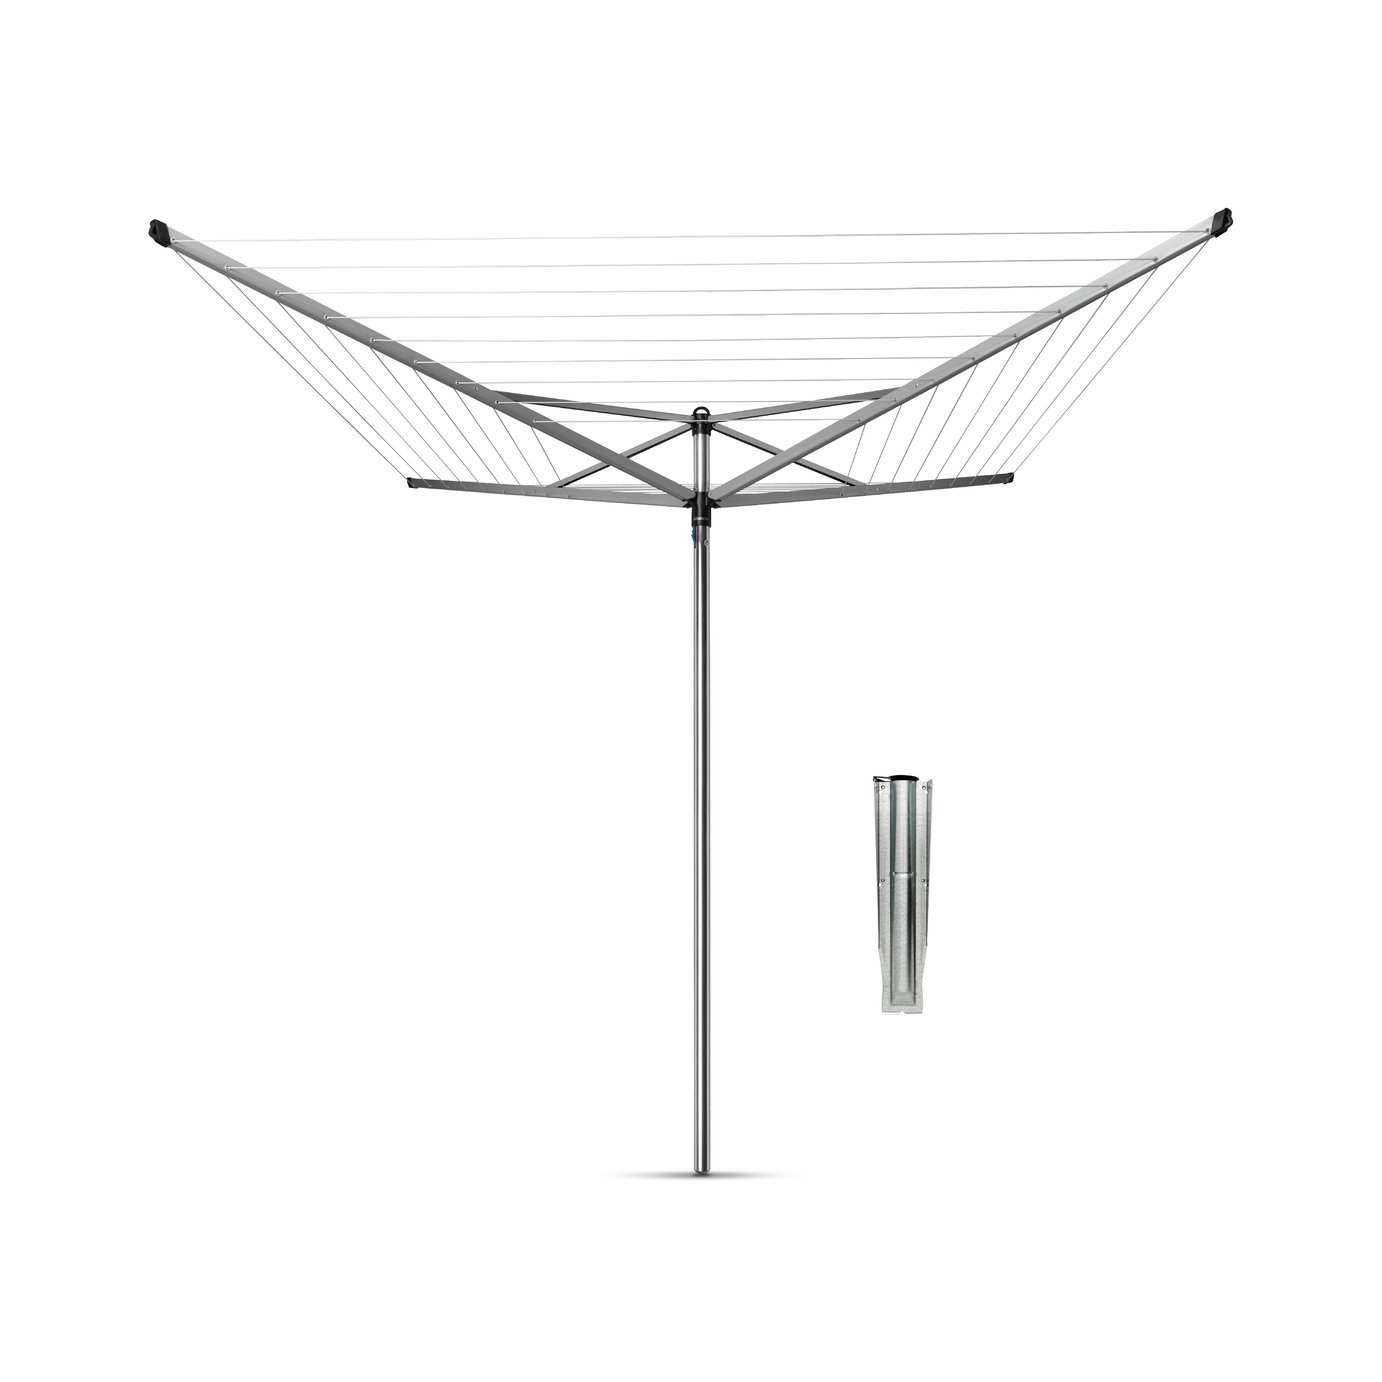 Brabantia 60m Topspinner Washing Line with Ground Spike